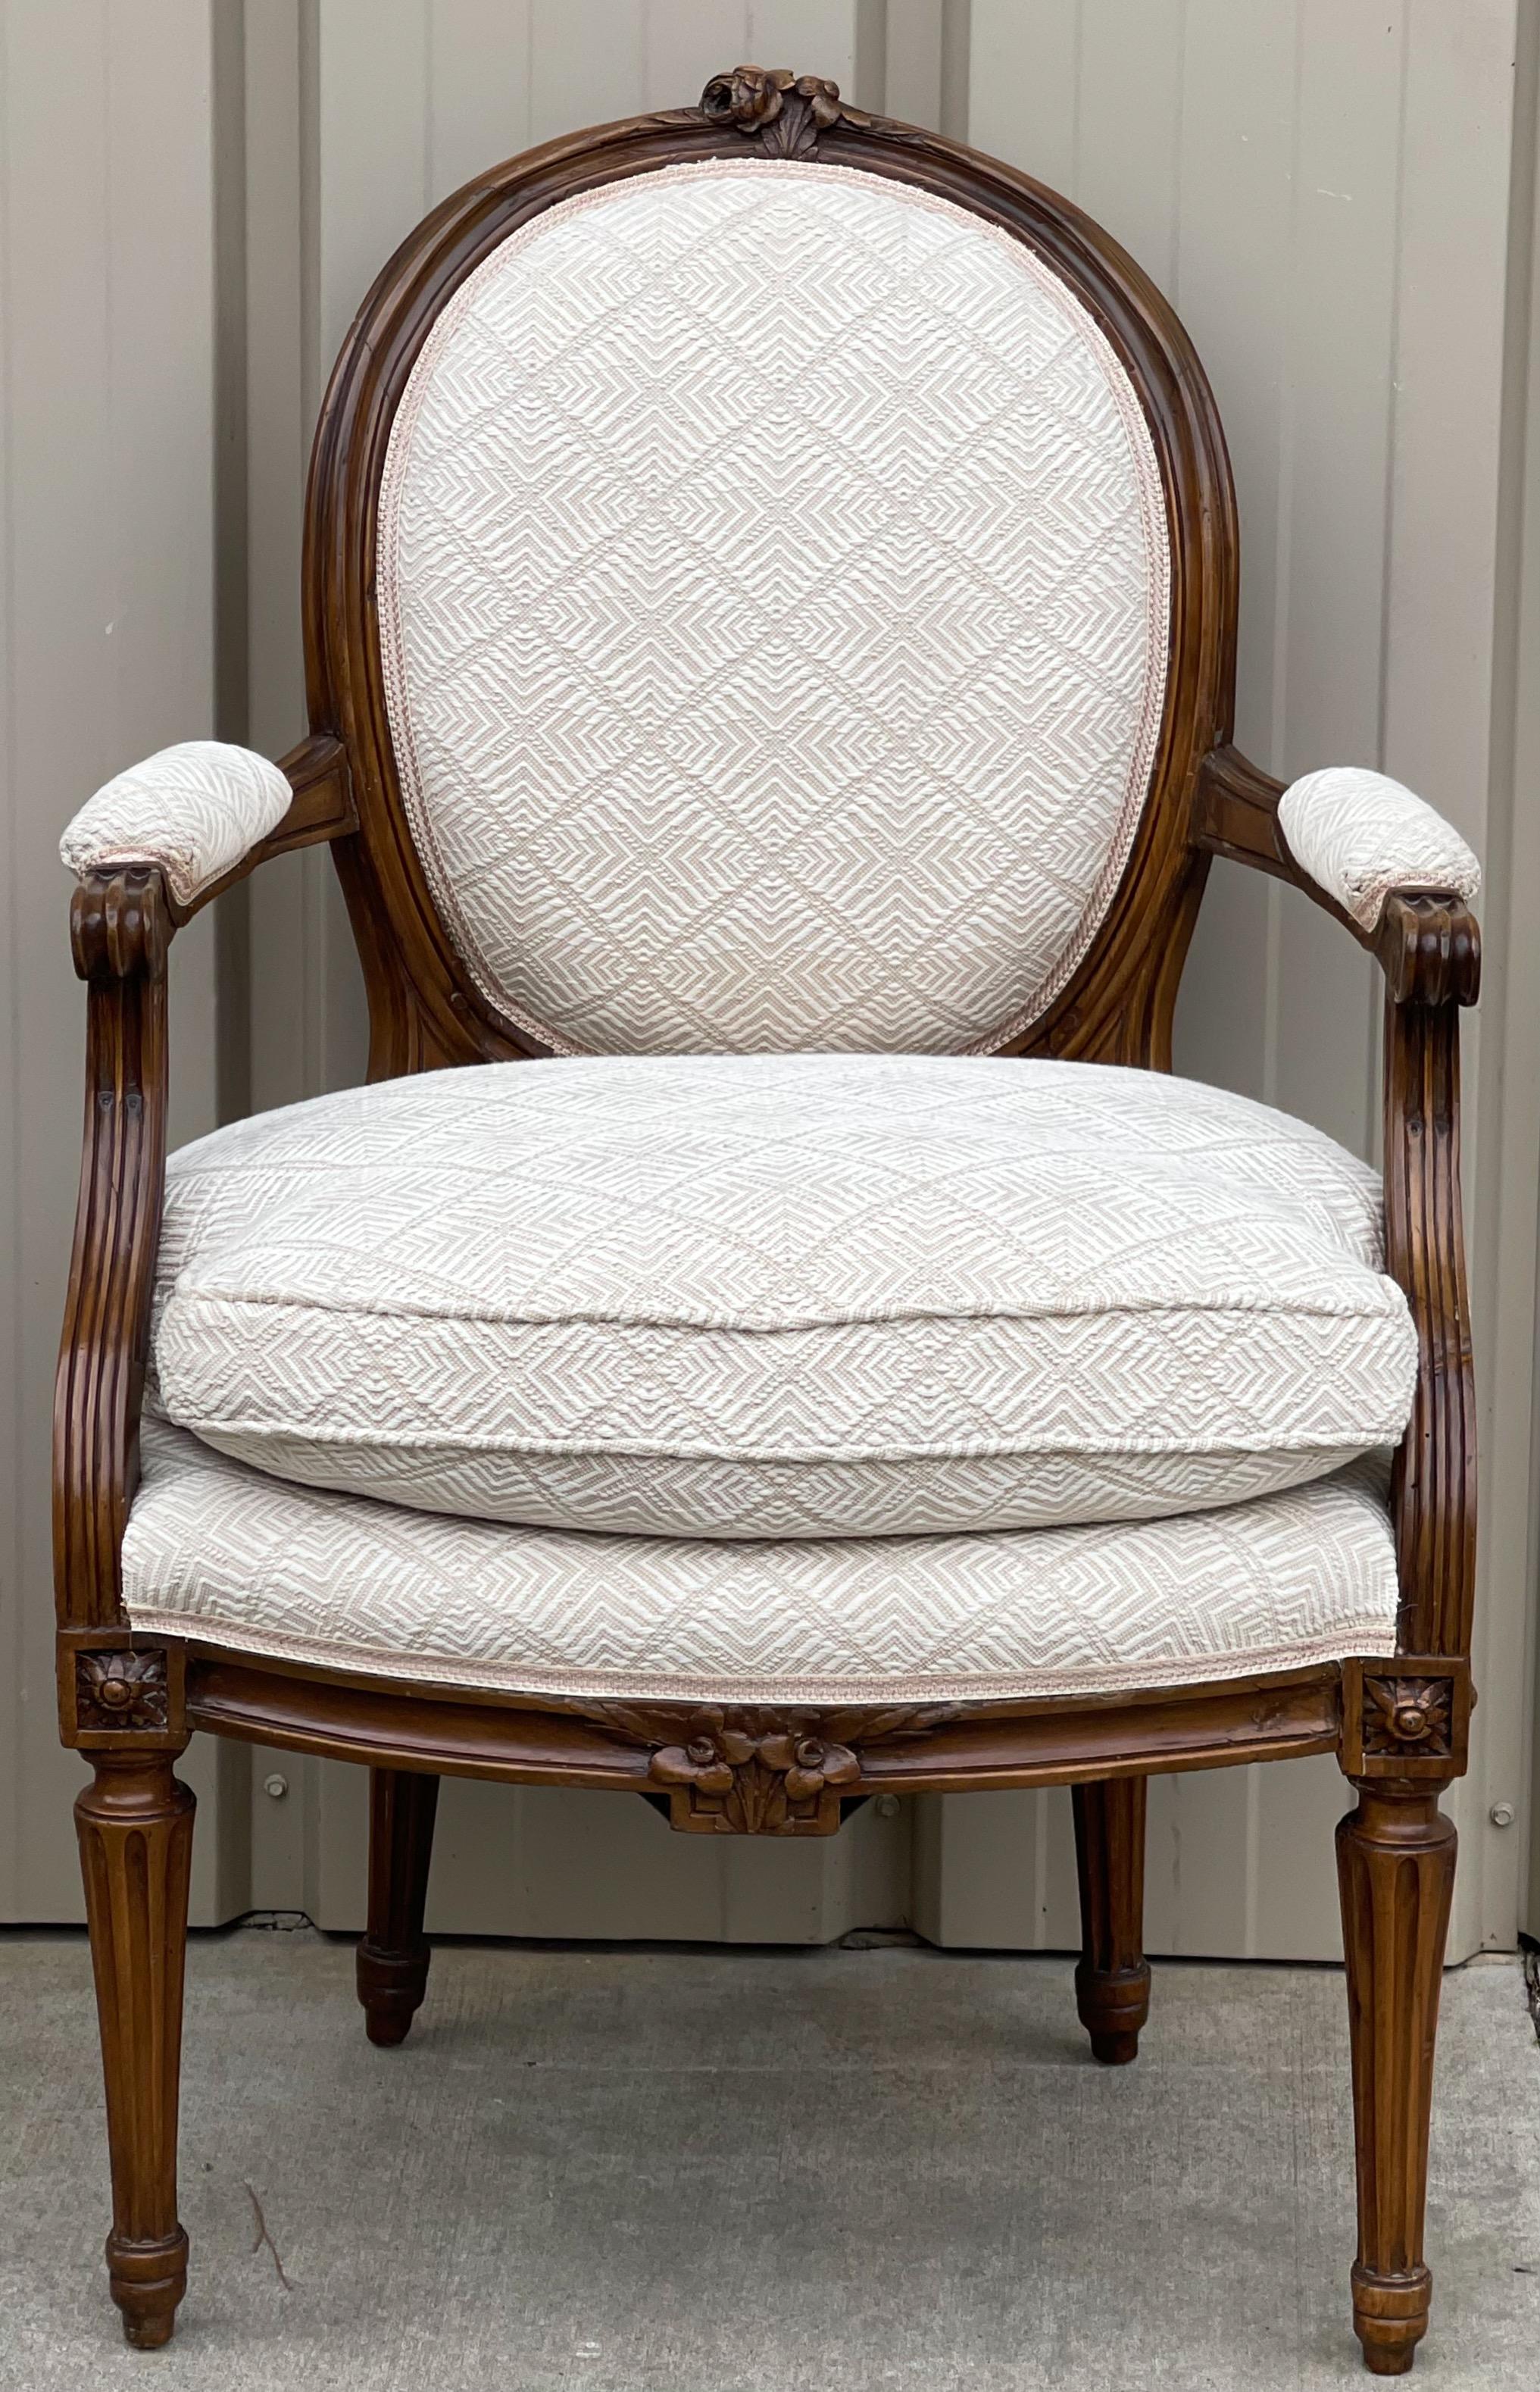 Upholstery Early 20th-C. Carved Fruitwood French Louis XVI Style Bergere Chairs, Pair